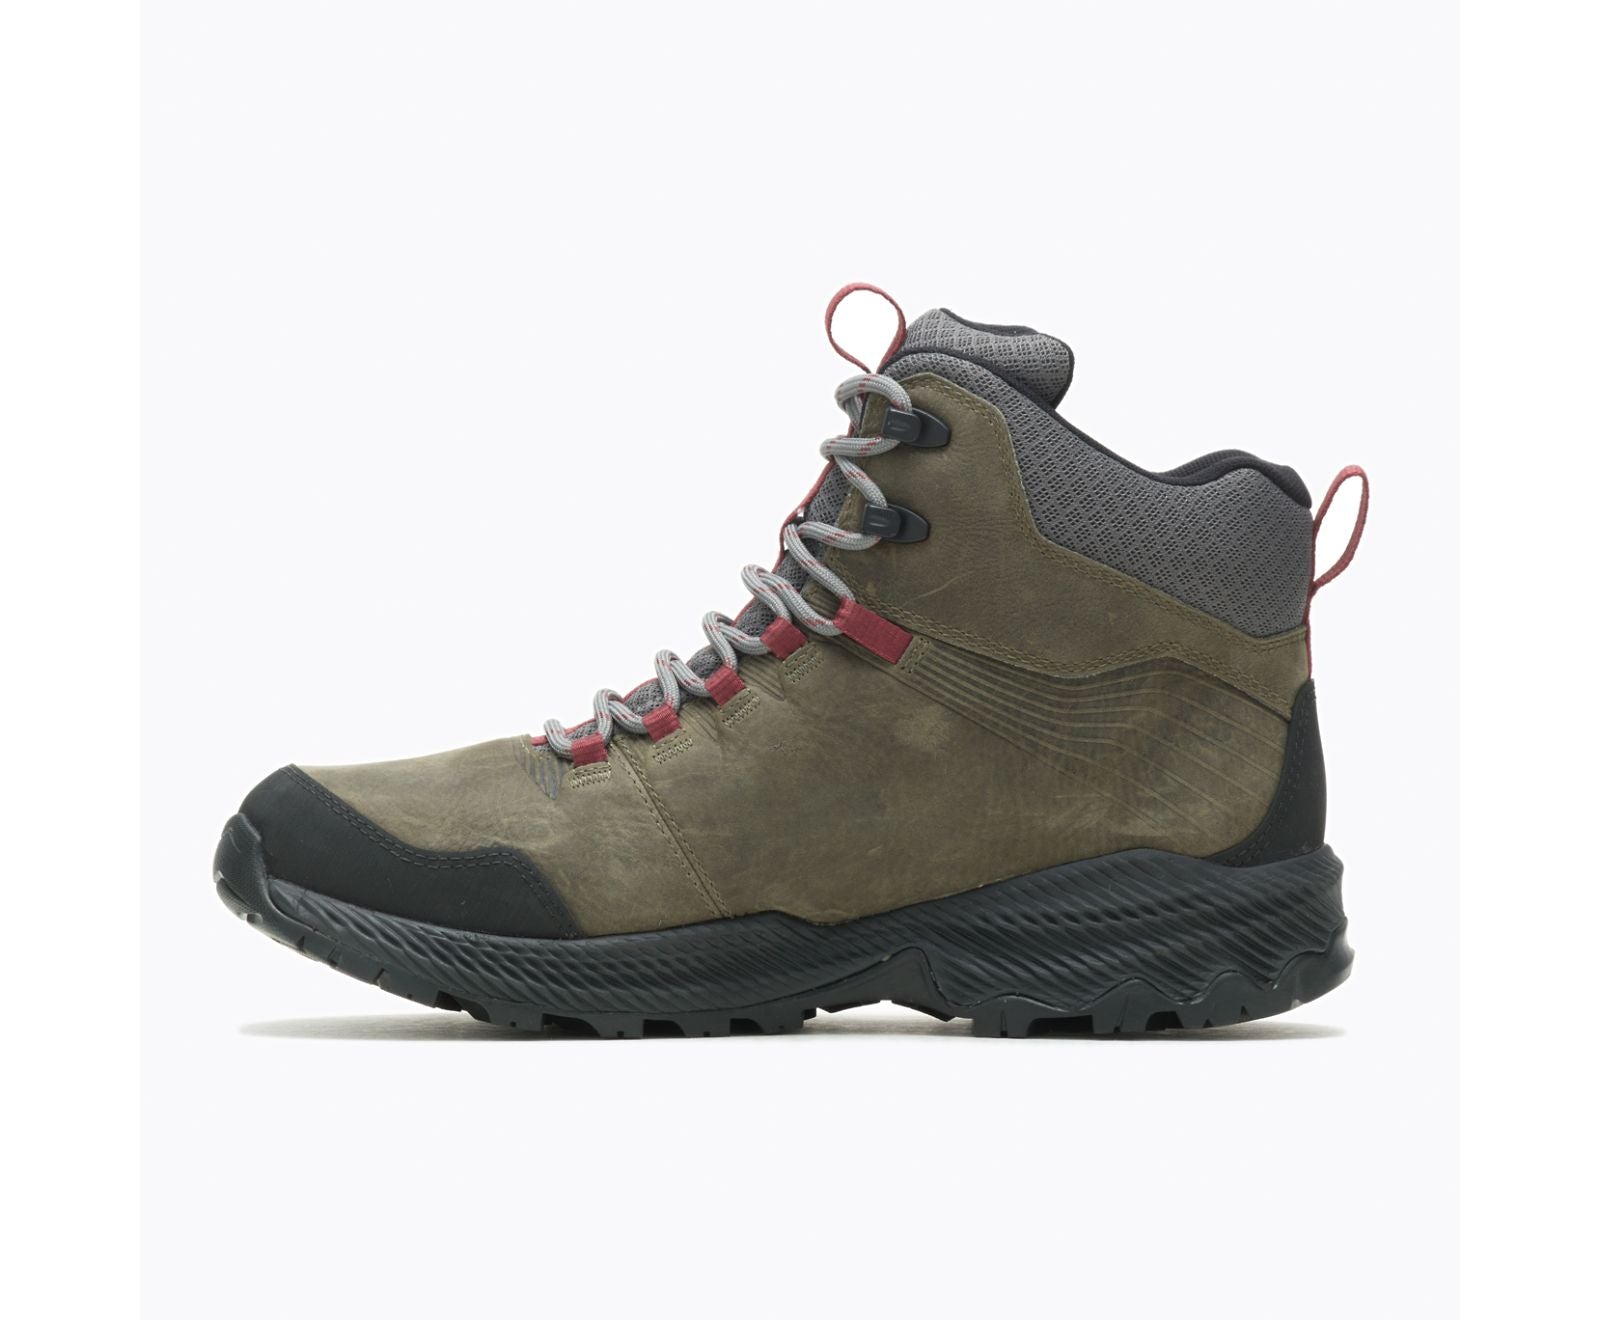 Merrell Forestbound Mid Mens Grey Waterproof Hiking Boot